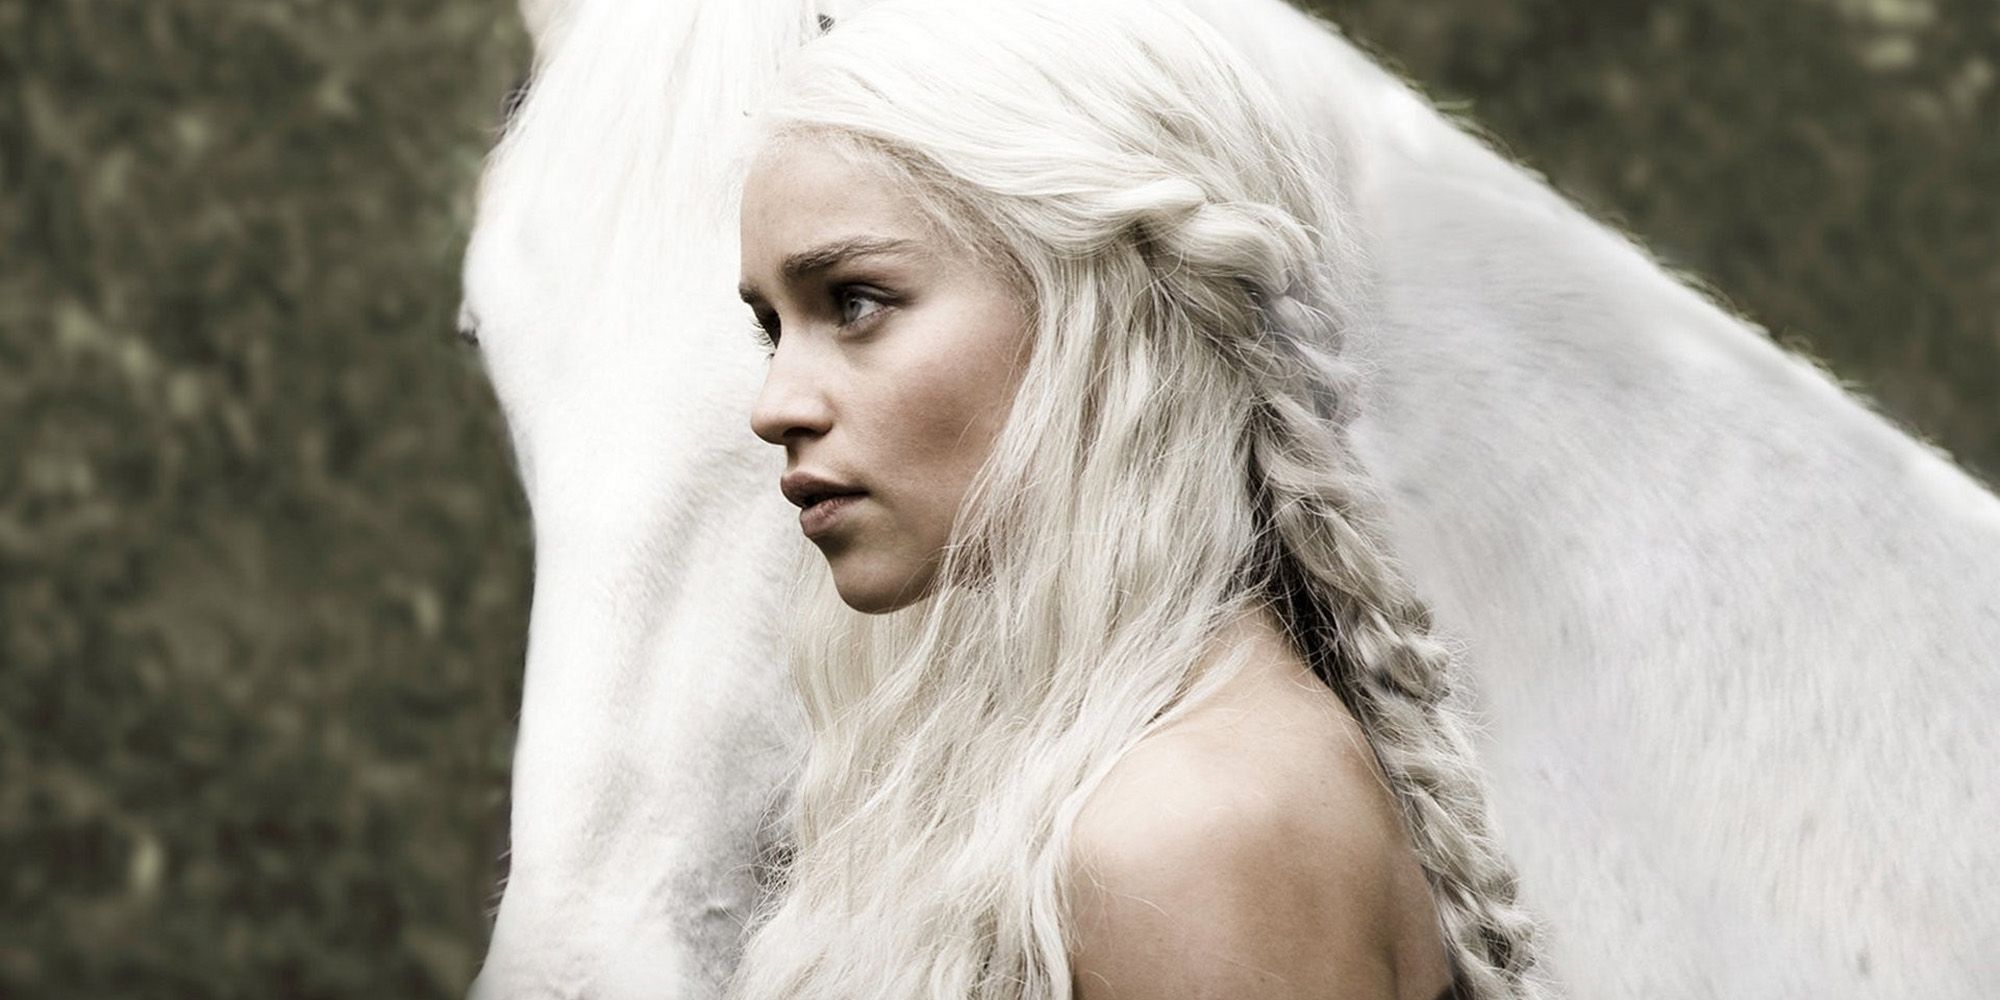 Get Inspired By The Game Of Thrones Hairstyles